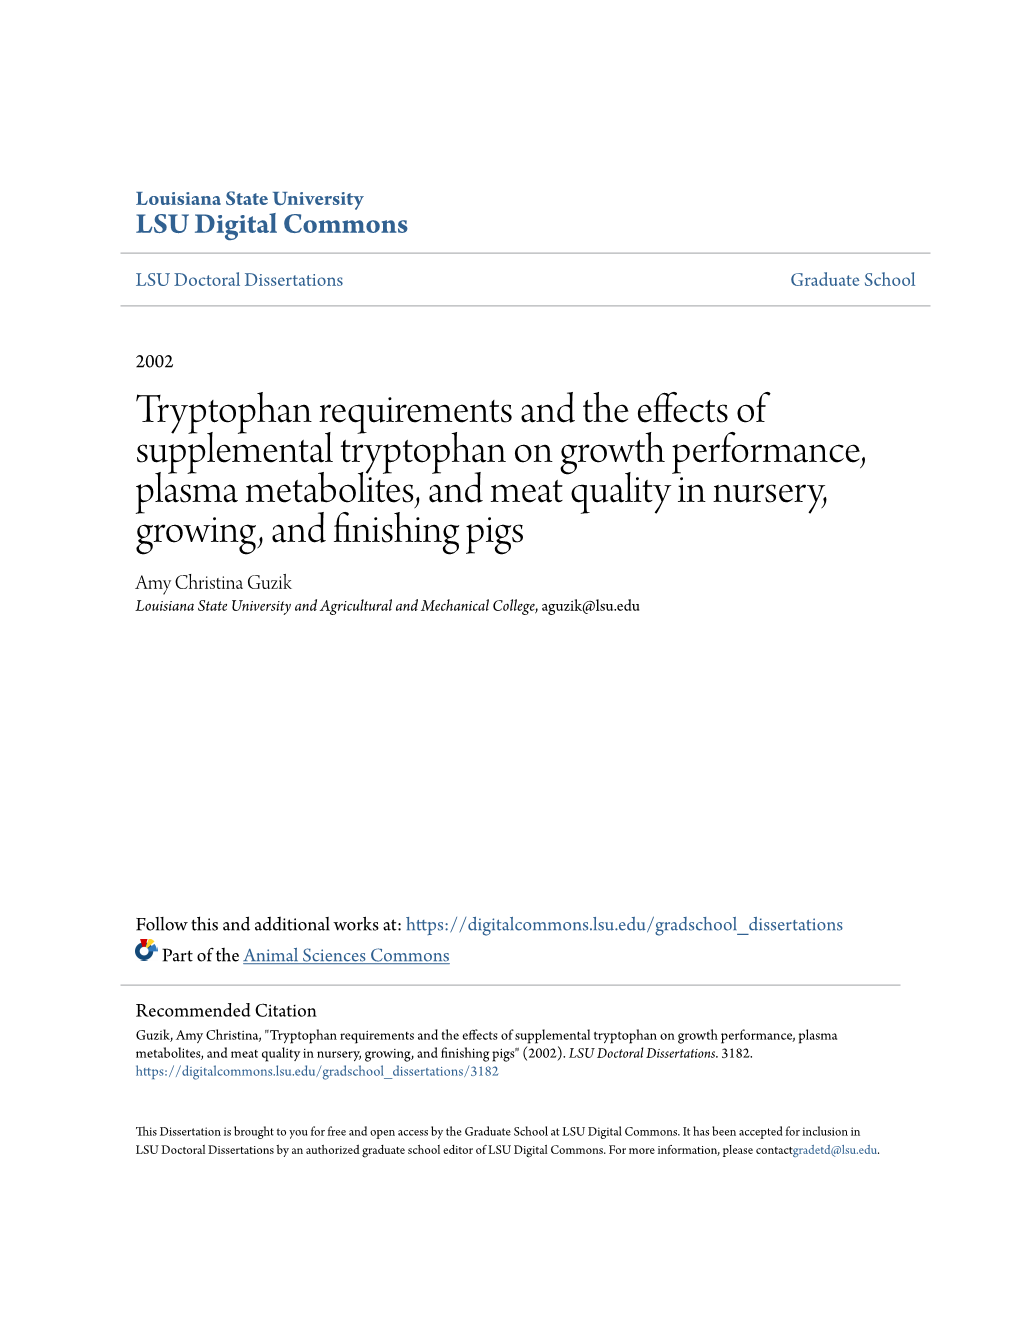 Tryptophan Requirements and the Effects of Supplemental Tryptophan